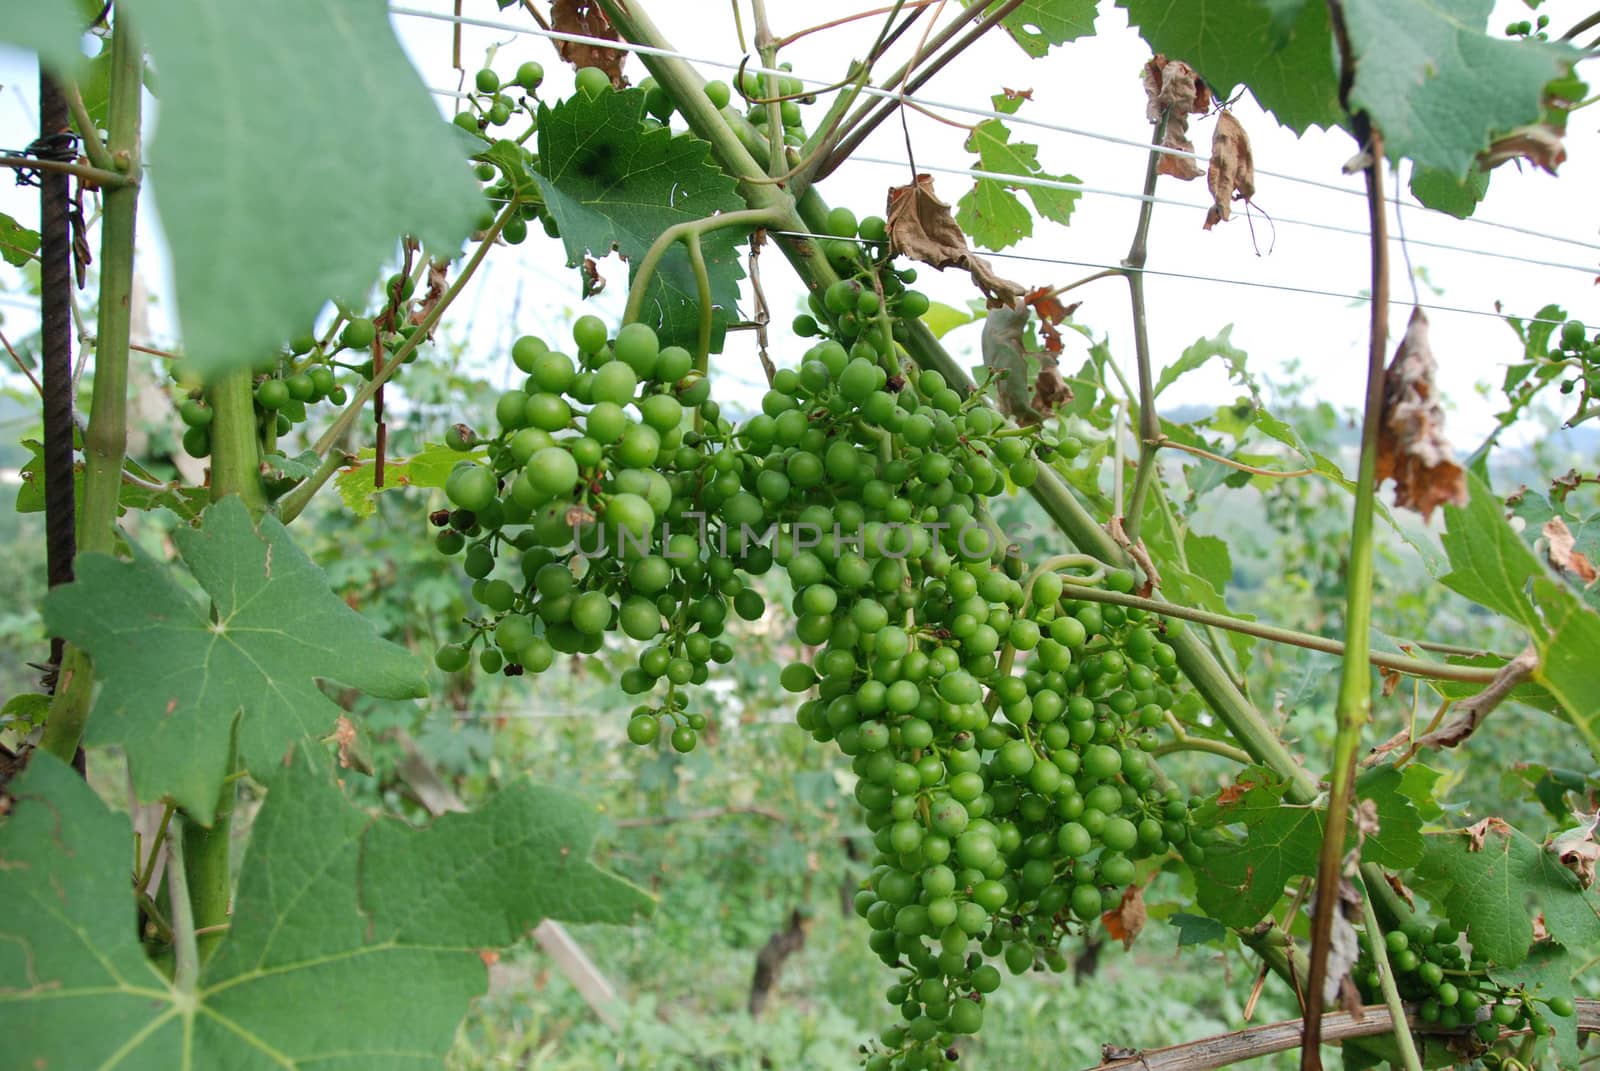 Still bittersweet bunch of grapes by cosca